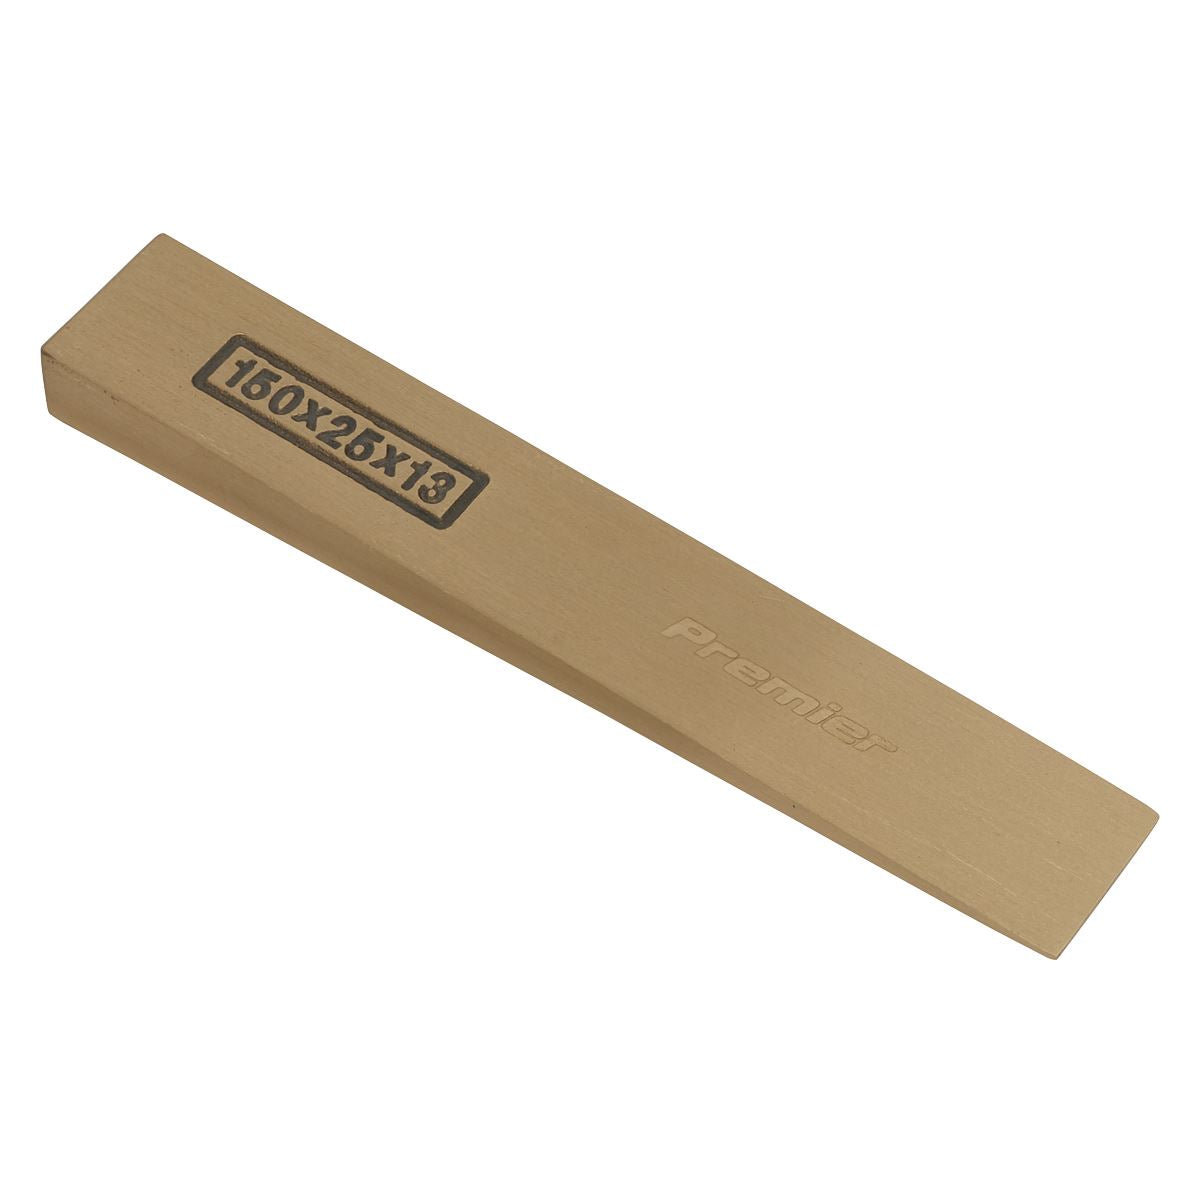 Sealey Premier Wedge 150 x 25 x 13mm - Non-Sparking